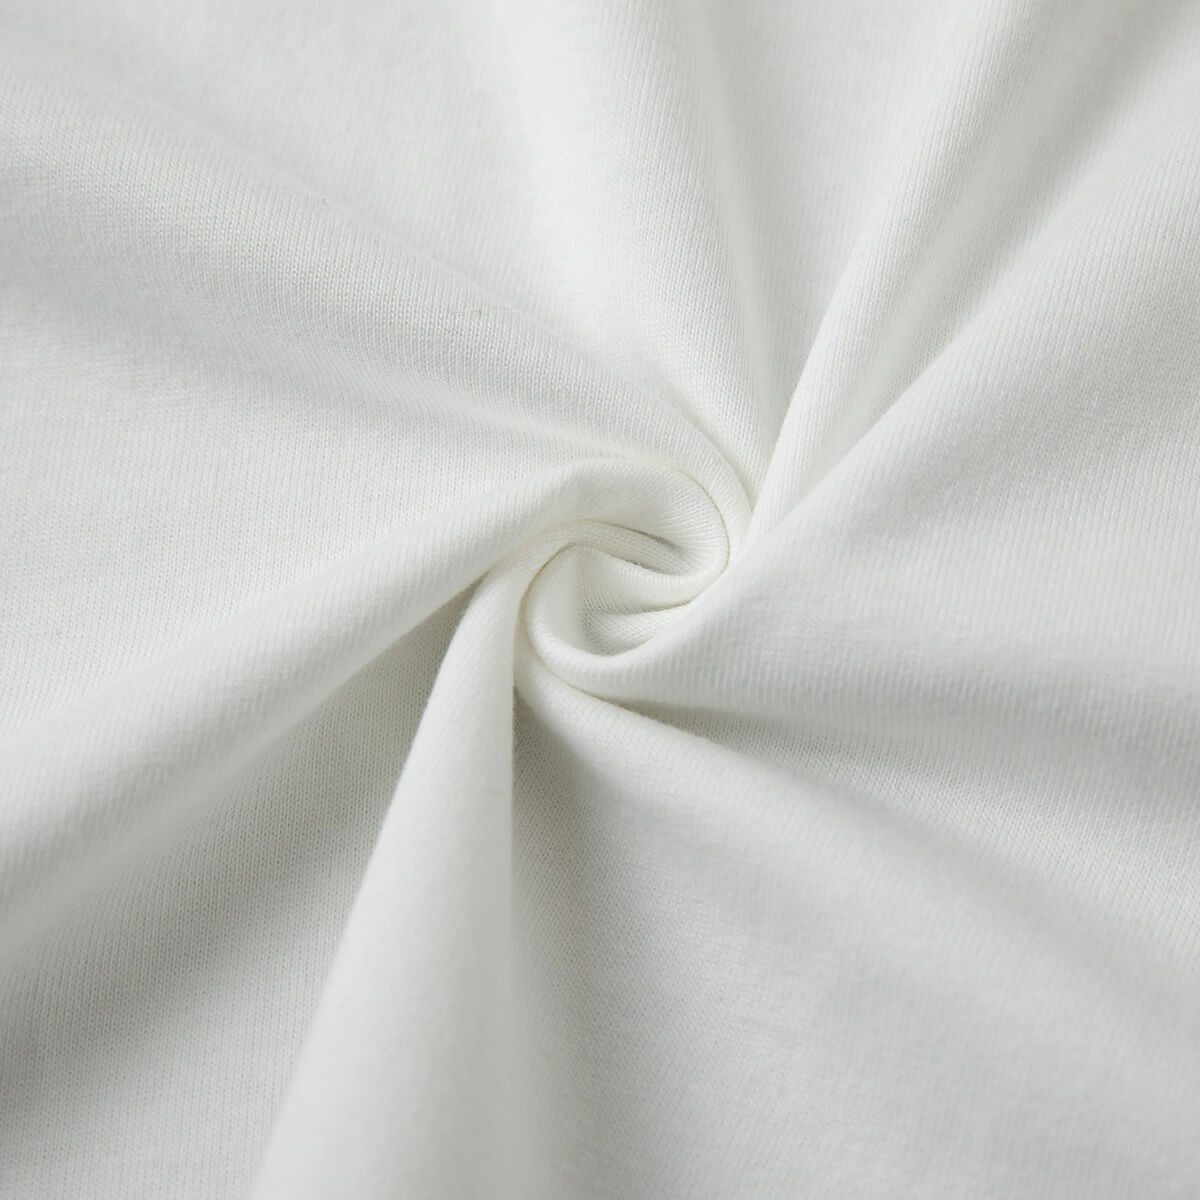 Ethereal cotton fabric with a gentle touch